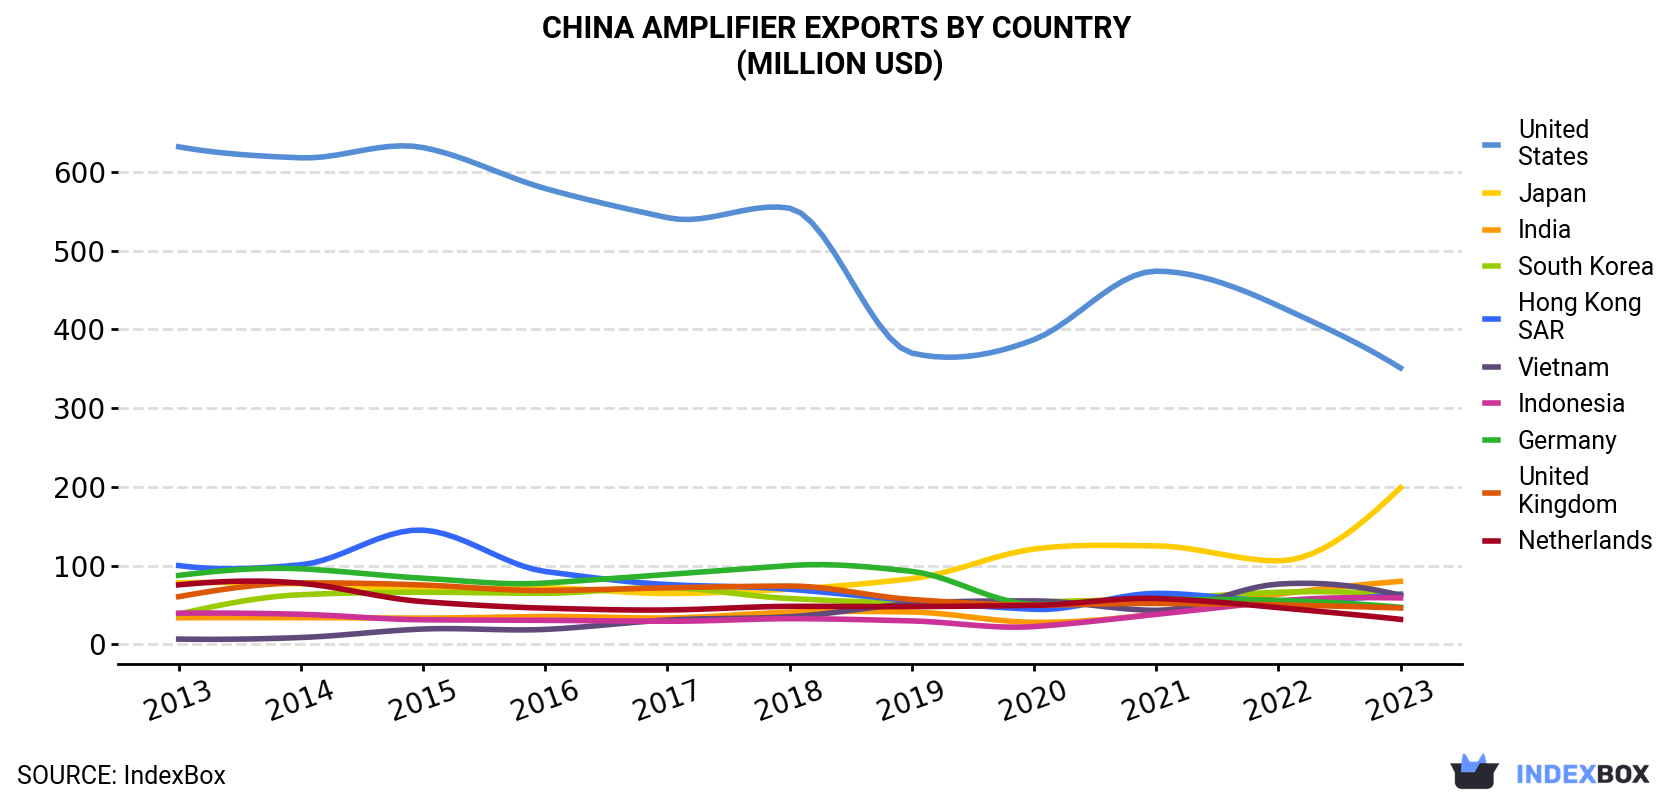 China Amplifier Exports By Country (Million USD)